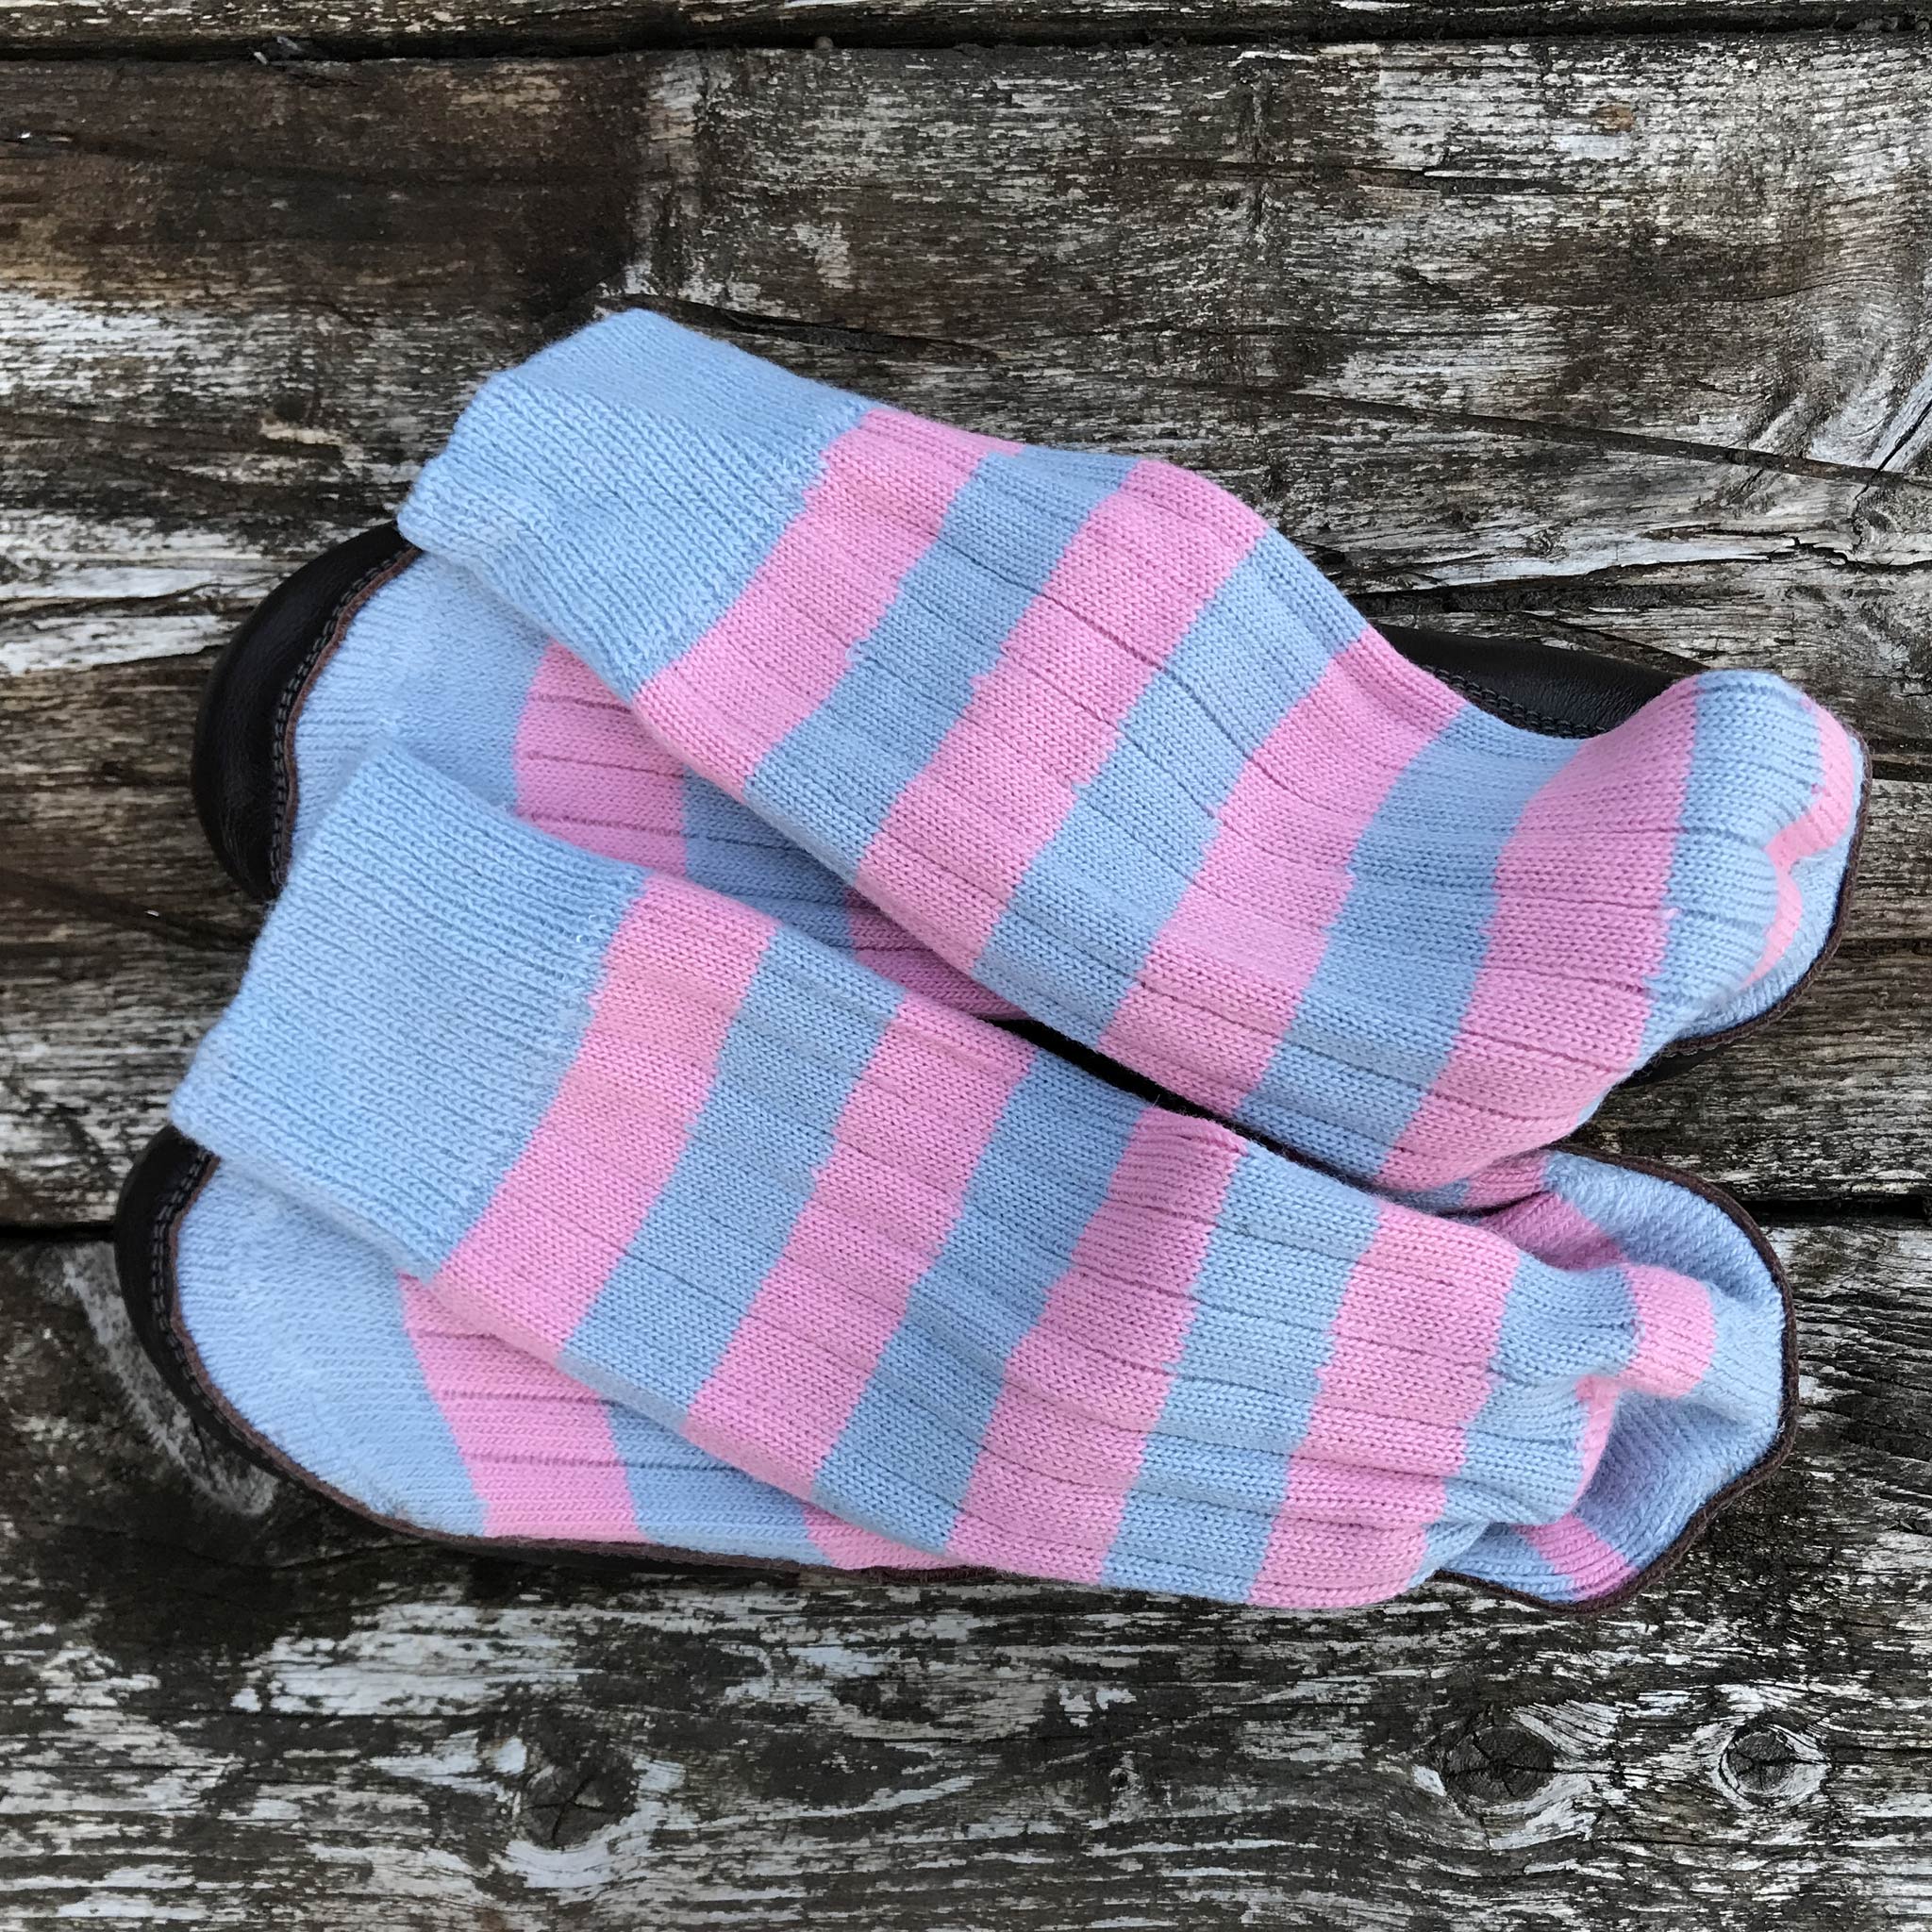 Slipper Sock sky blue and pink stripe - overhead view